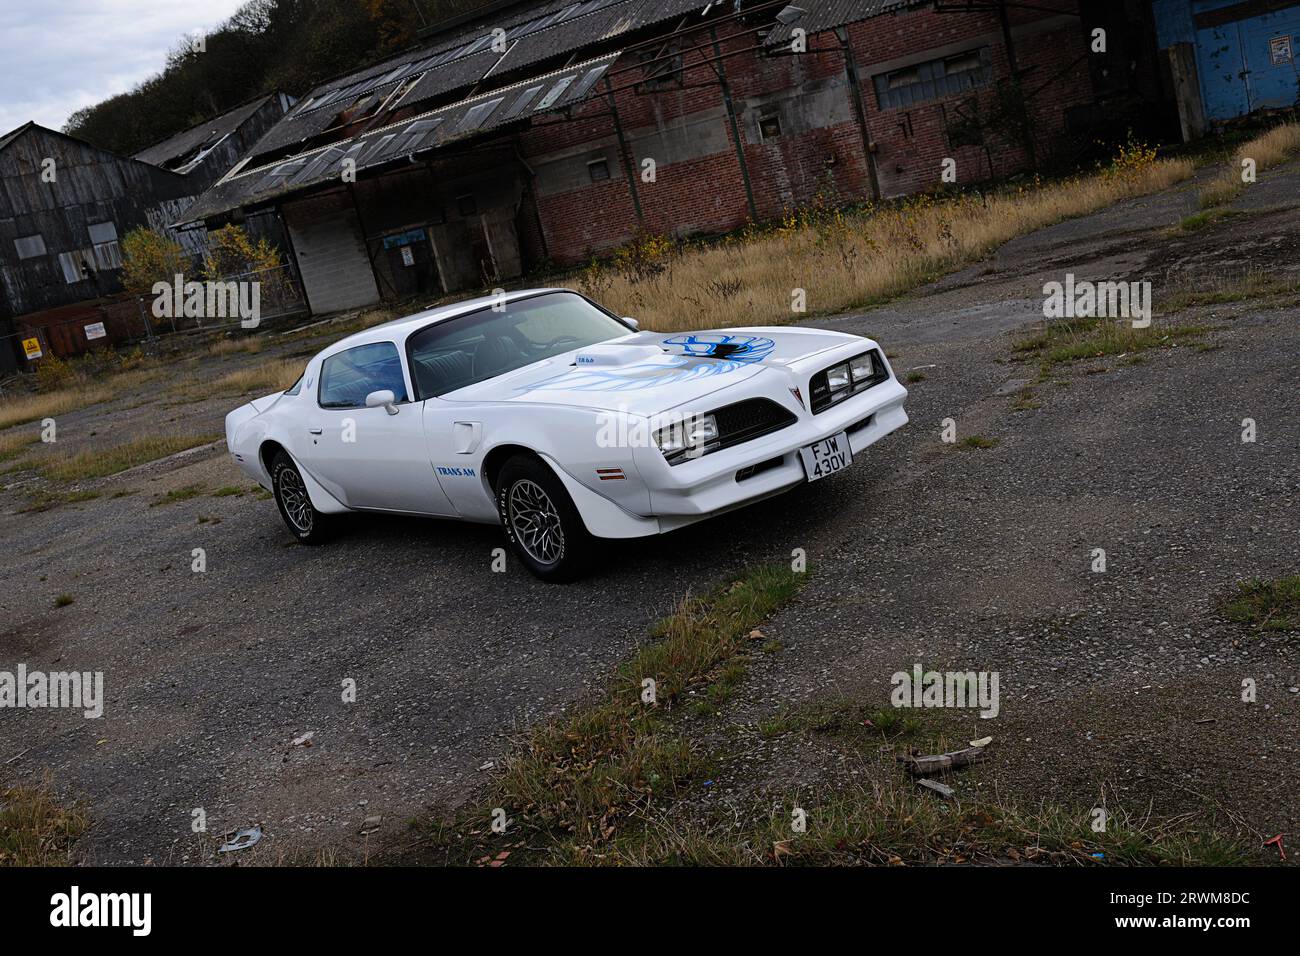 White Pontiac Firebird Trans-Am parked in a derelict industrial setting on a winter's day Stock Photo